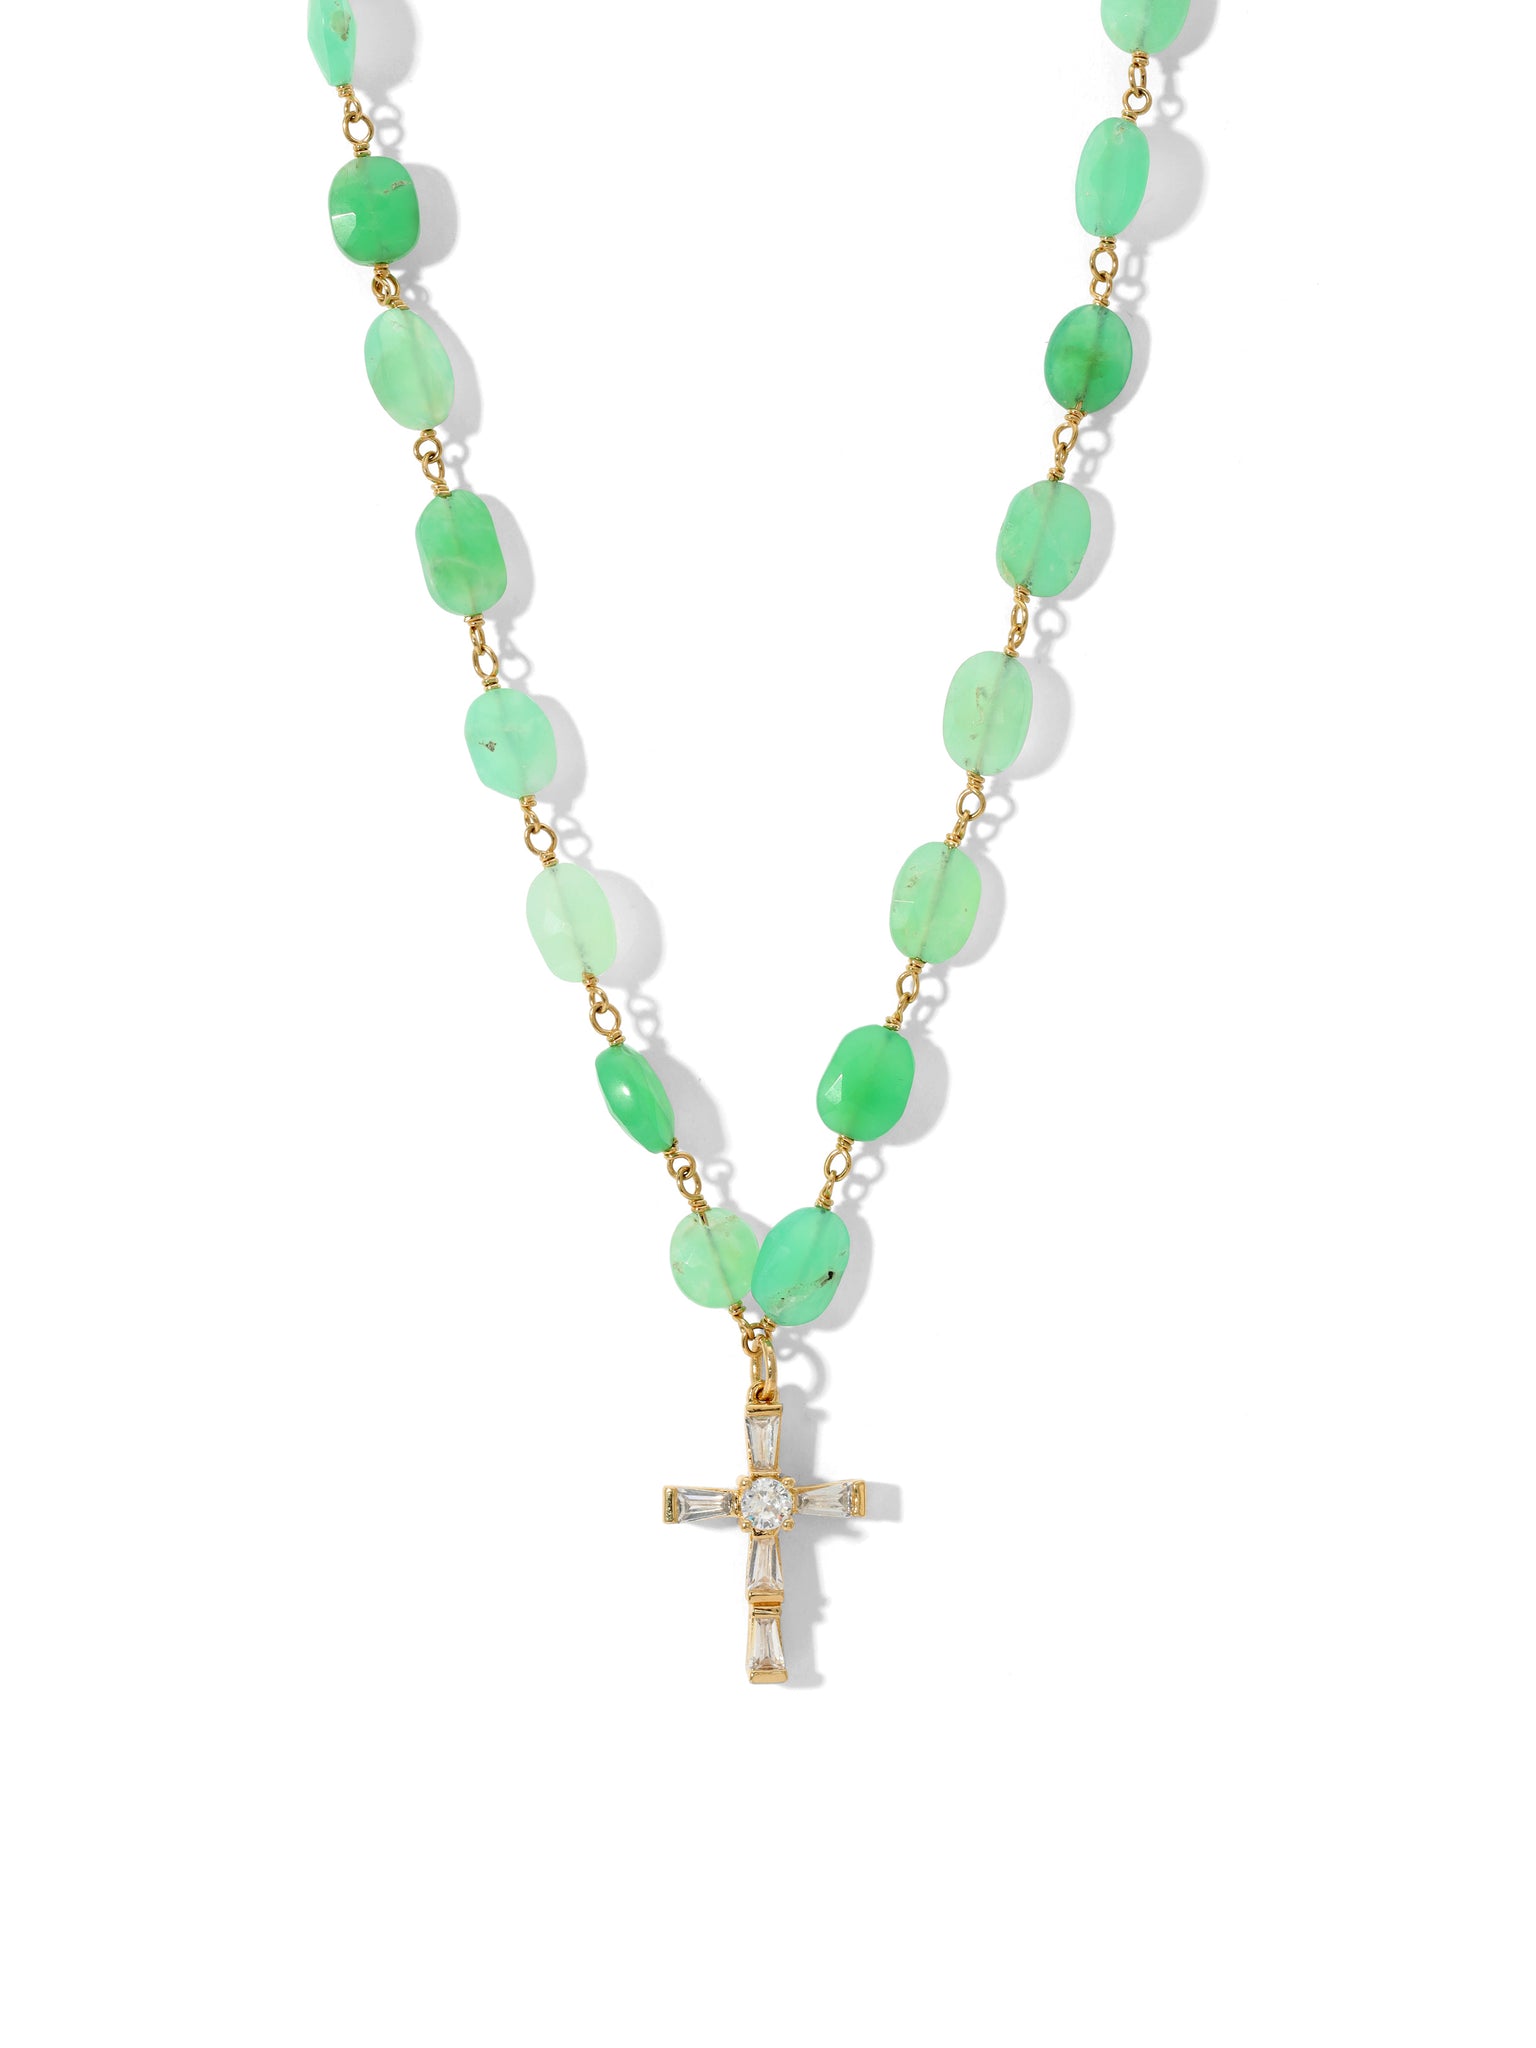 The Ivy Cross Necklace